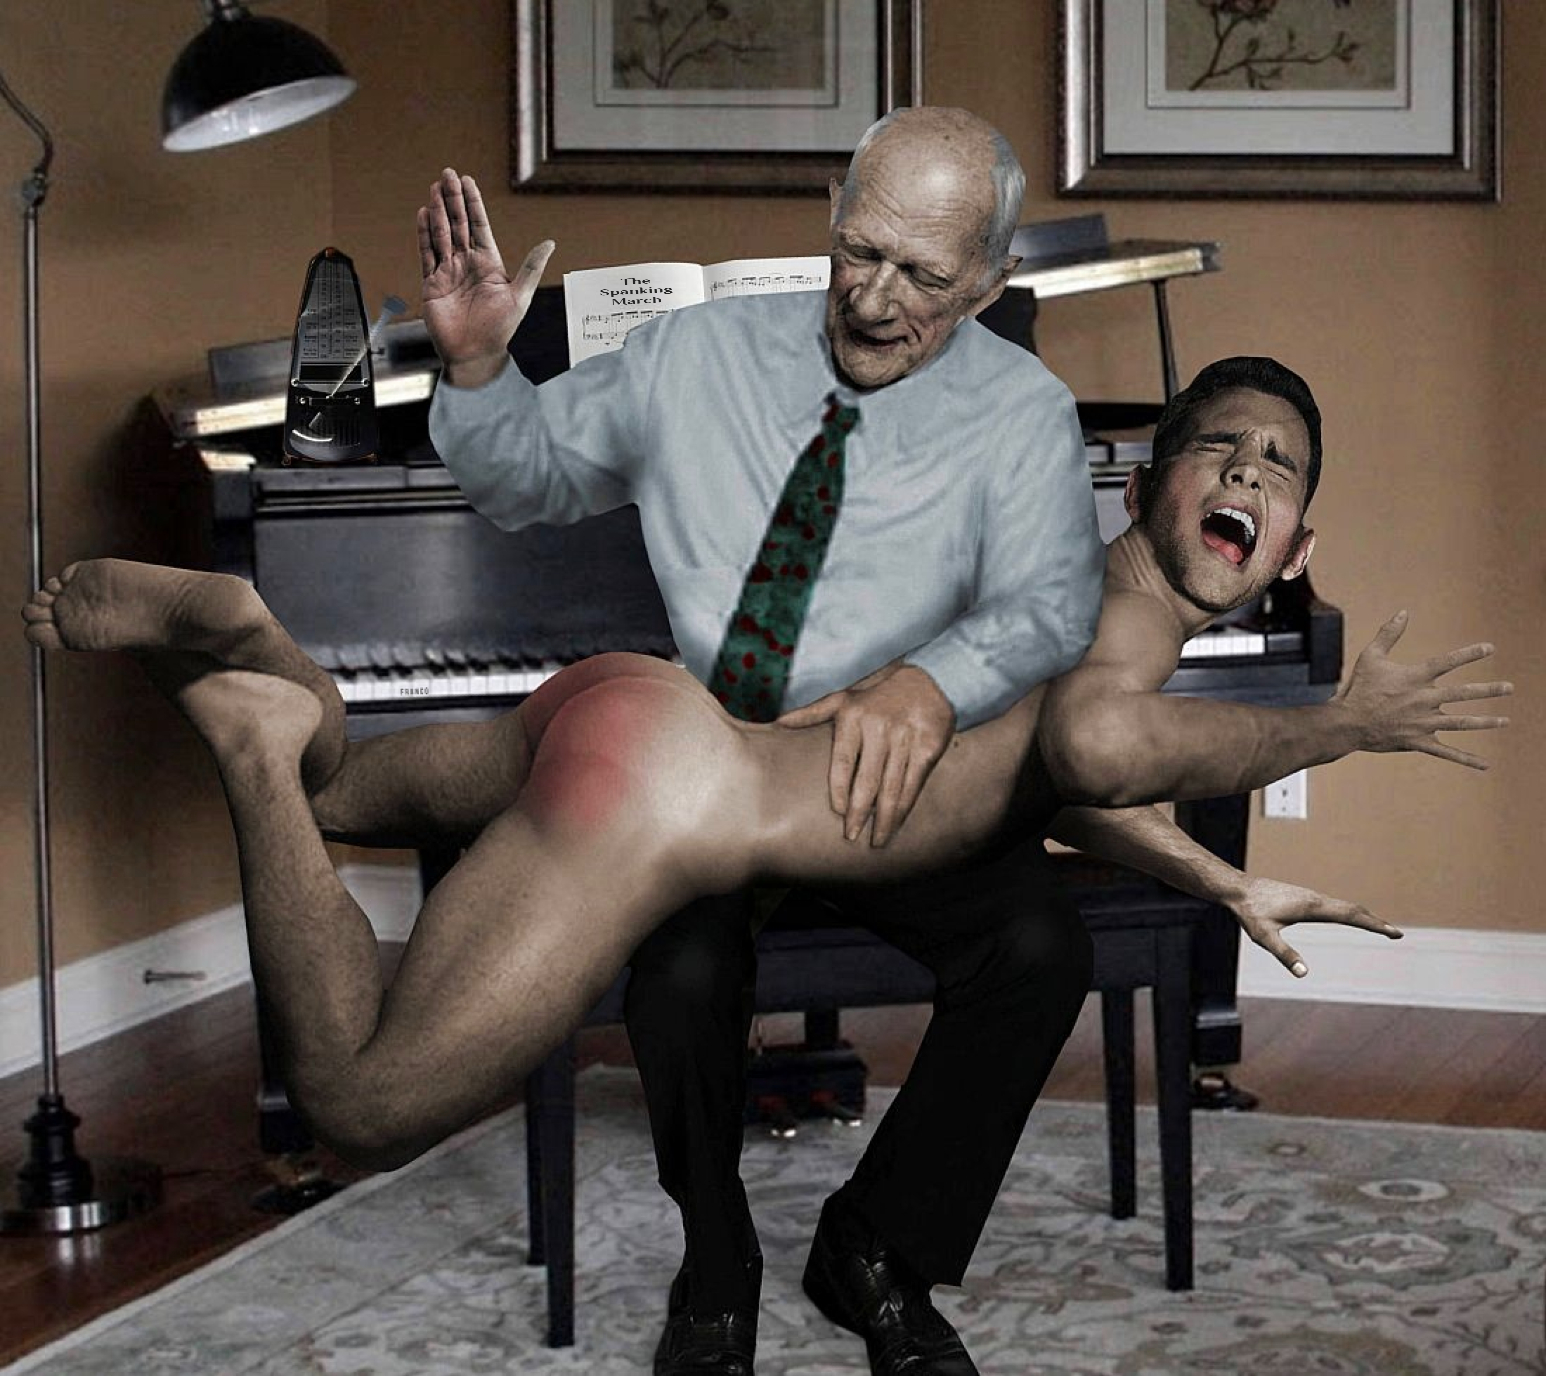 Some More Spanking Art from the Incredible Franco - Jock Spank photo